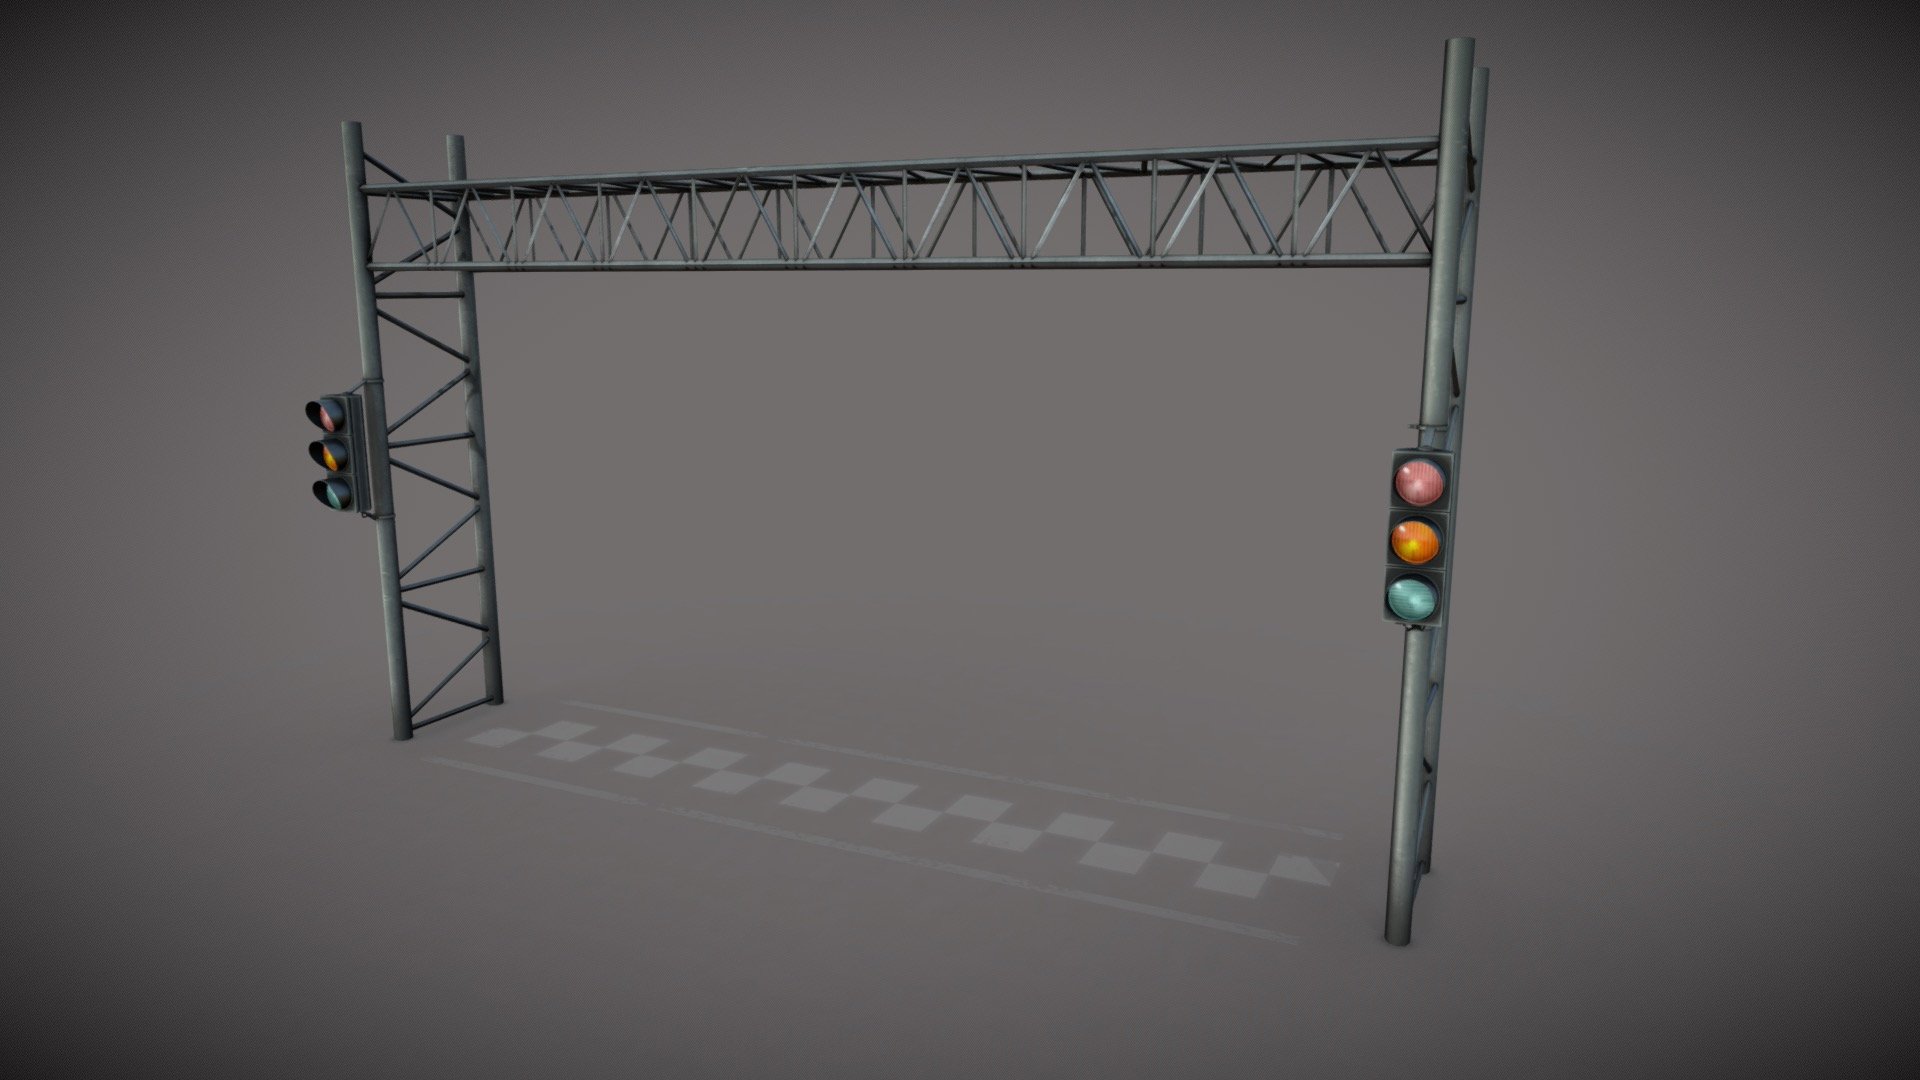 Start gate at a race track
Initially intended for Second life
Lights and shadows are backed on diffuse maps - Start Gate at race track - 3D model by [AMC] (@automania) 3d model